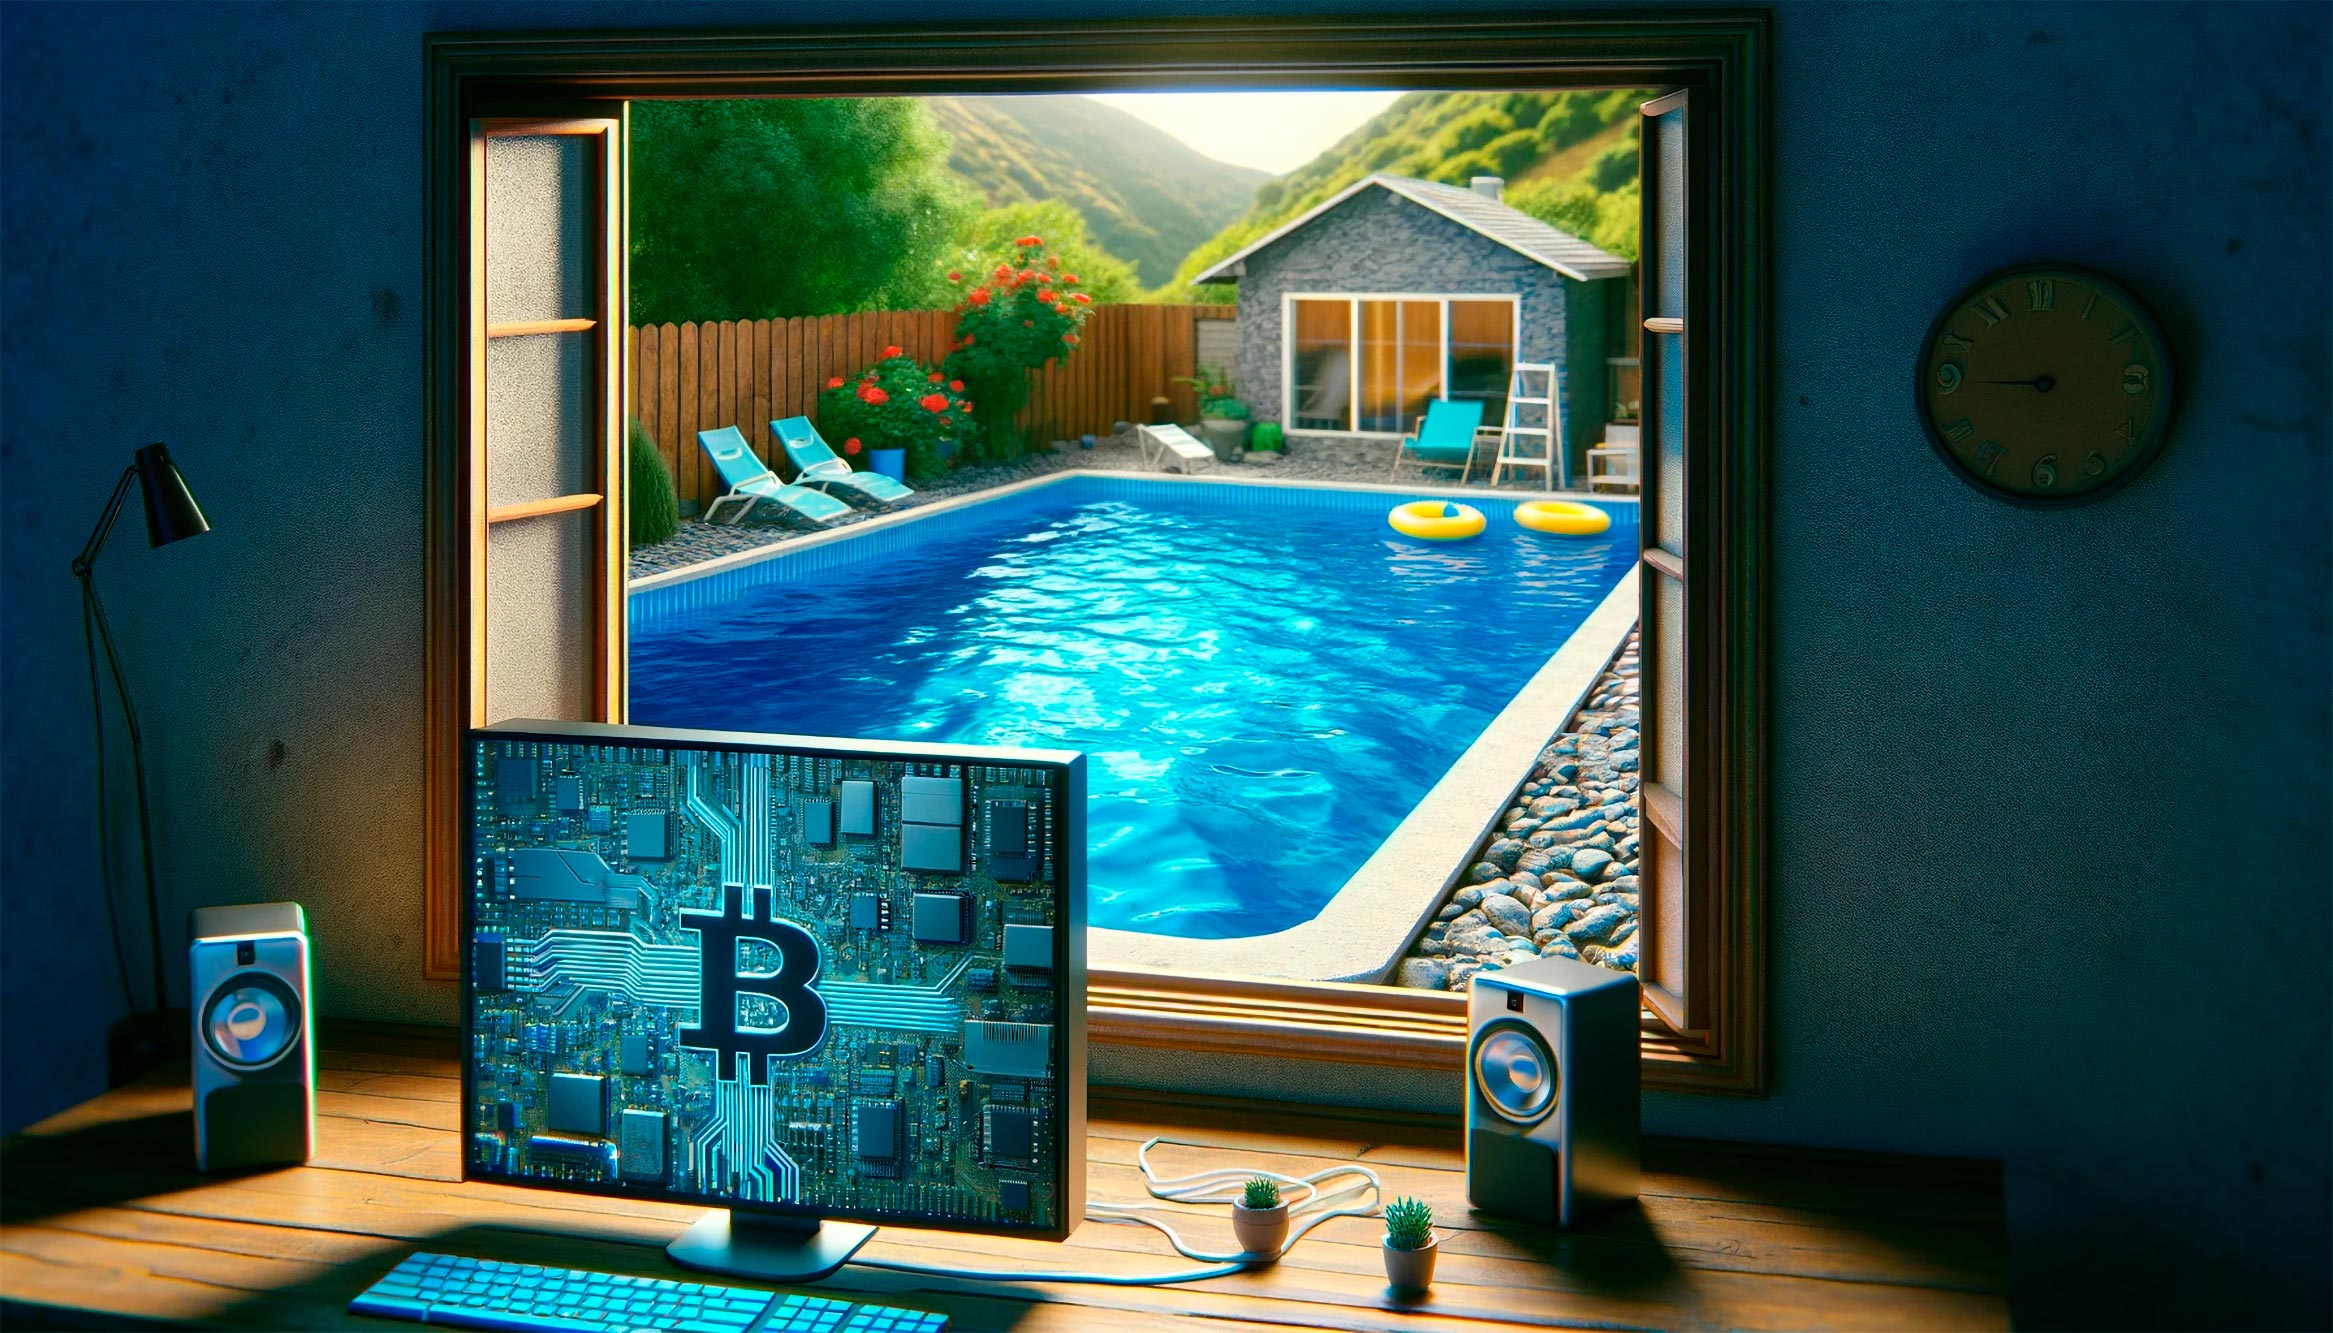 A Single Bitcoin Transaction Consumes a Pool’s Worth of Water